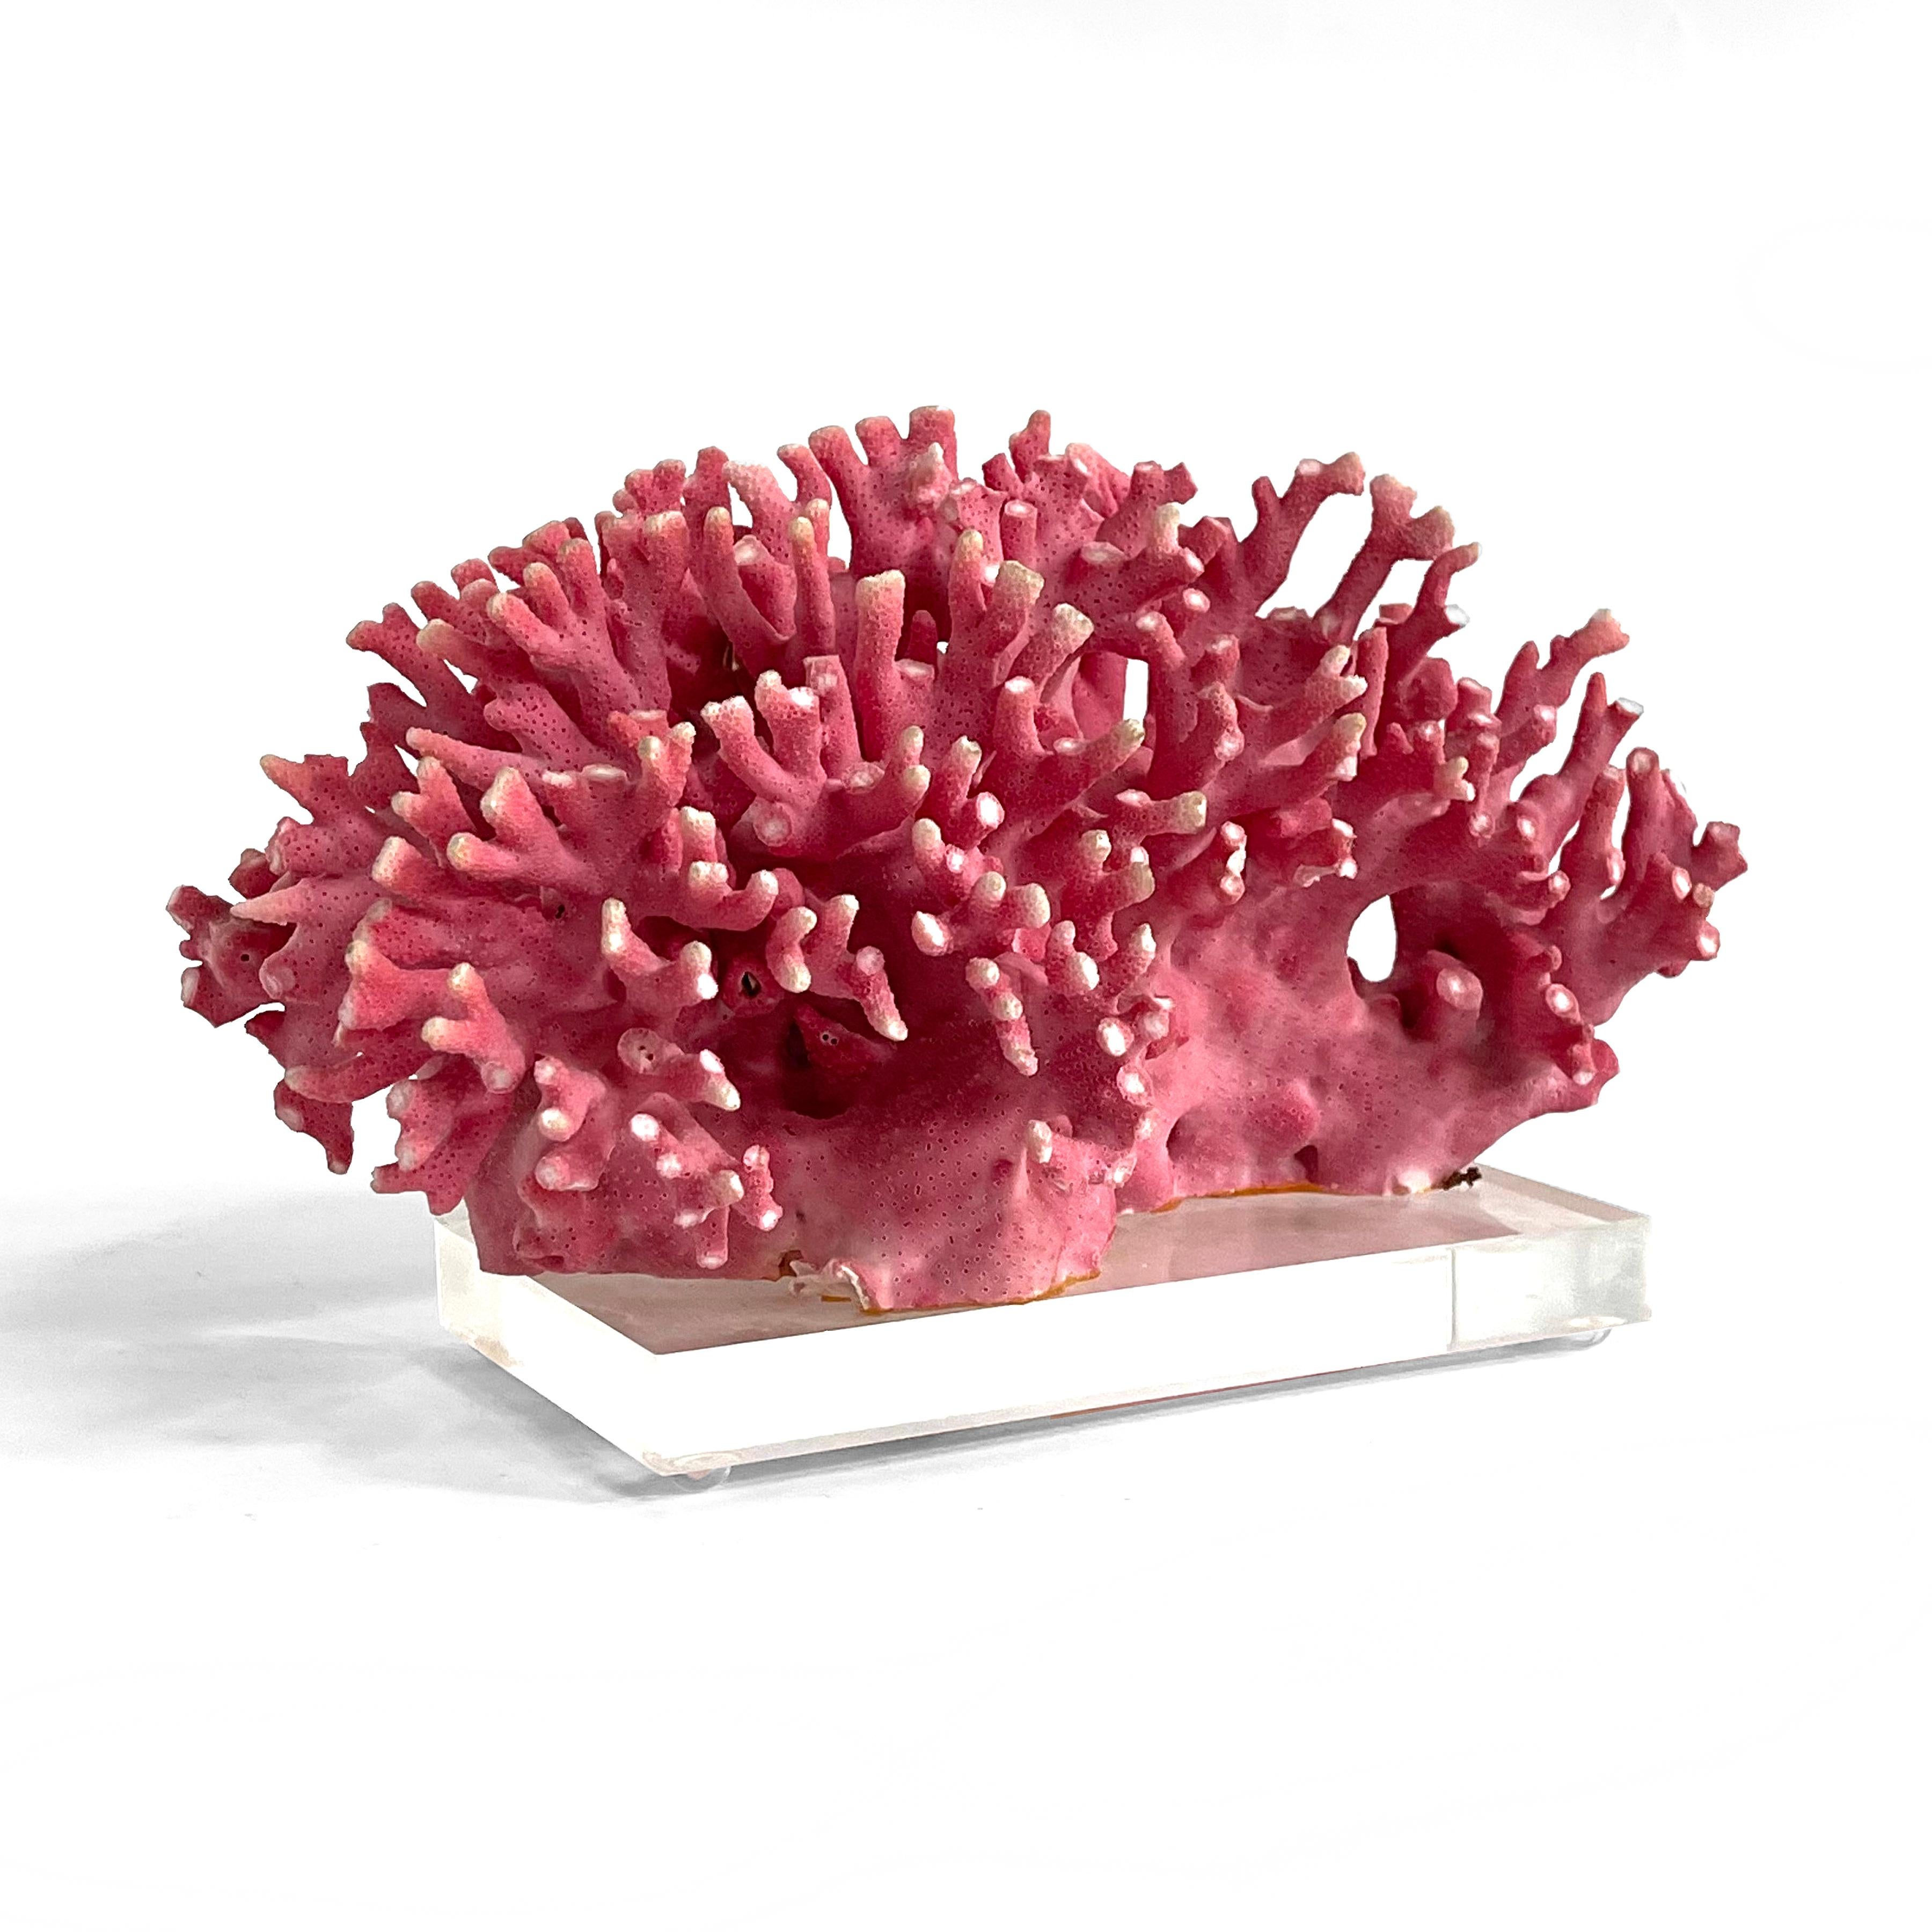 This lovely vintage selection of pink coral is a rare specimen beautifully presented. The California Hydrocoral is a slow growing, deep water coral which unfortunately was overharvested years ago. Therefore today they are very protected and vintage